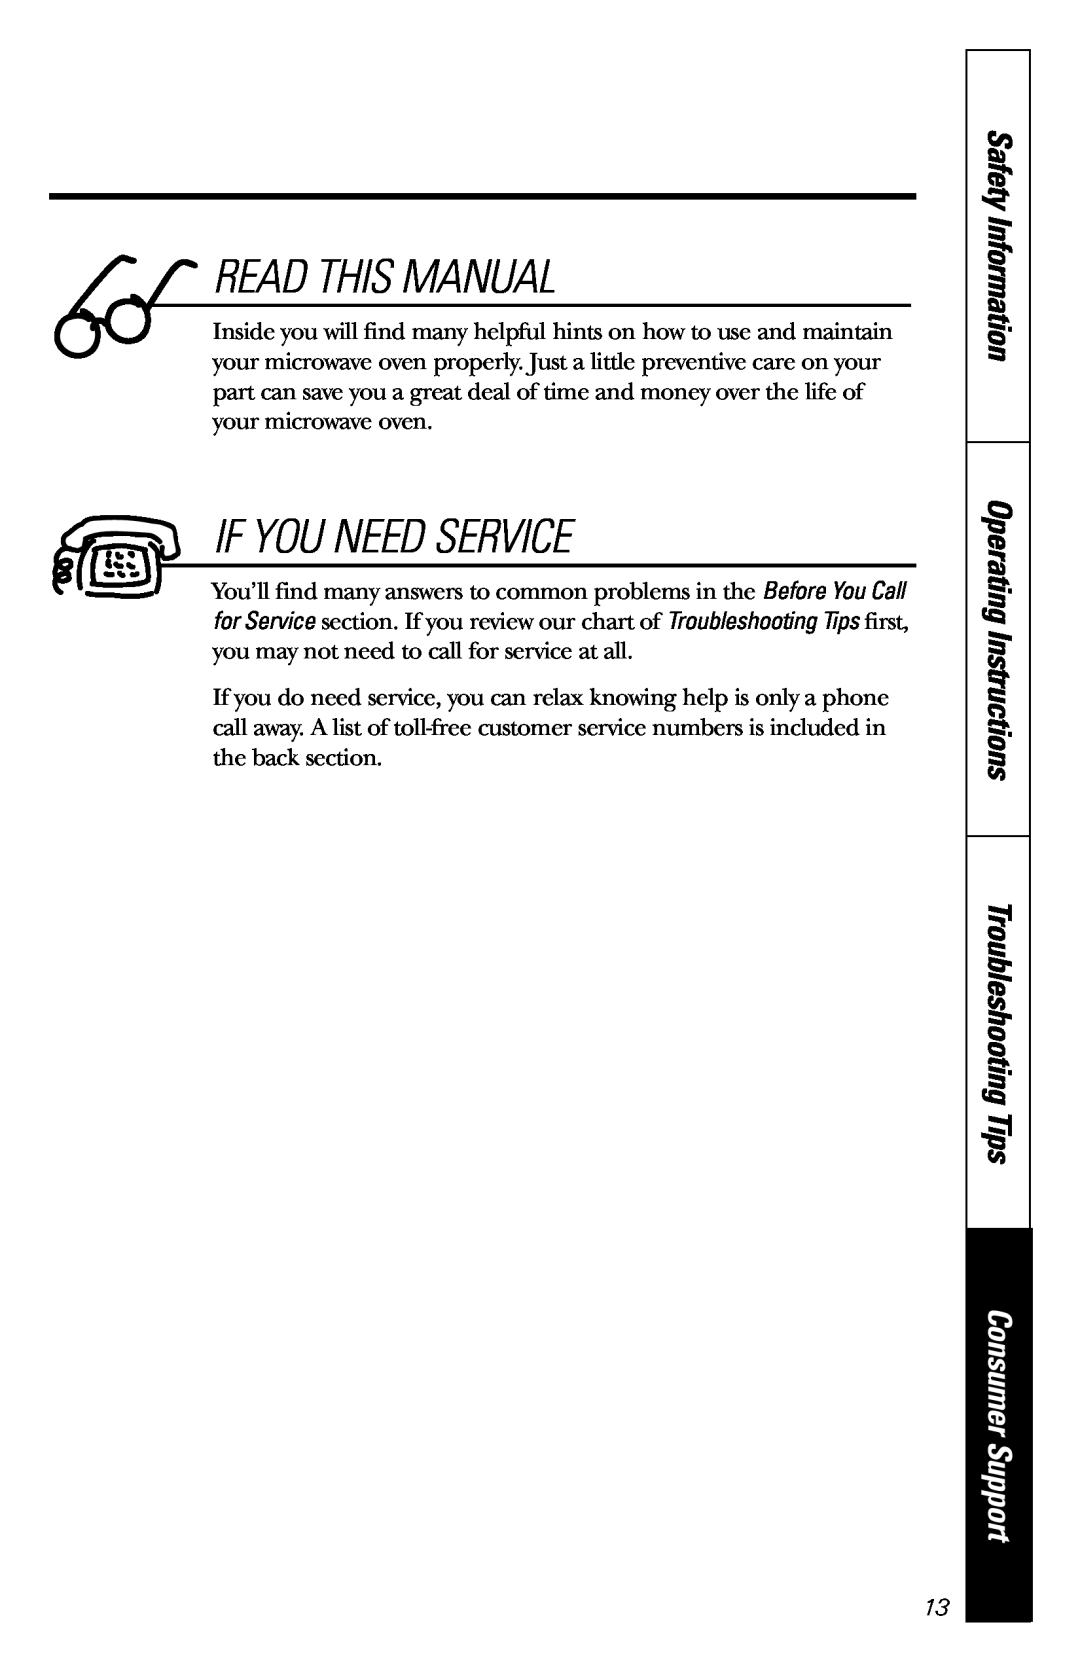 GE JES1231 Read This Manual, If You Need Service, Safety Information Operating Instructions Troubleshooting Tips 